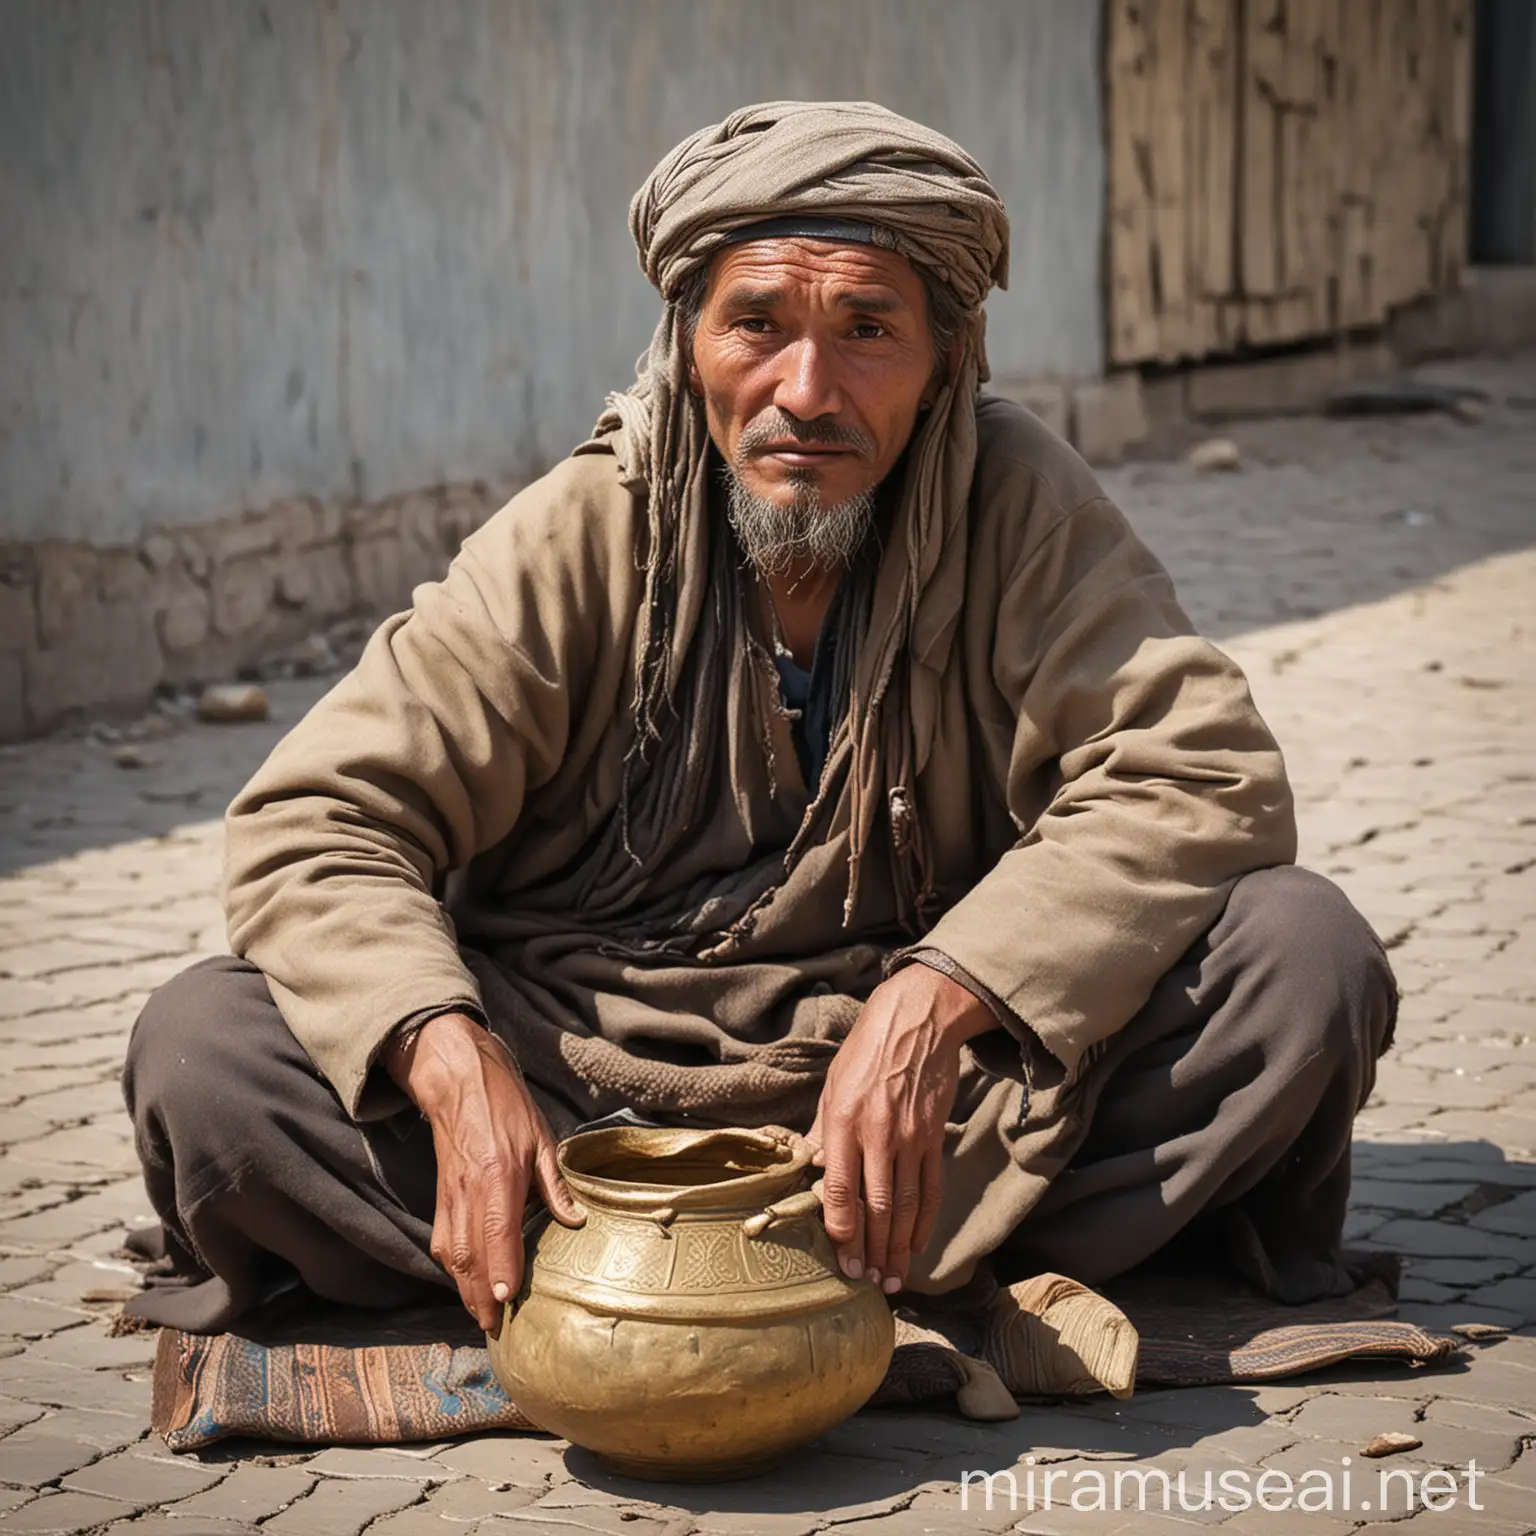 Central Asian Style Beggar Thief in Intriguing Urban Setting